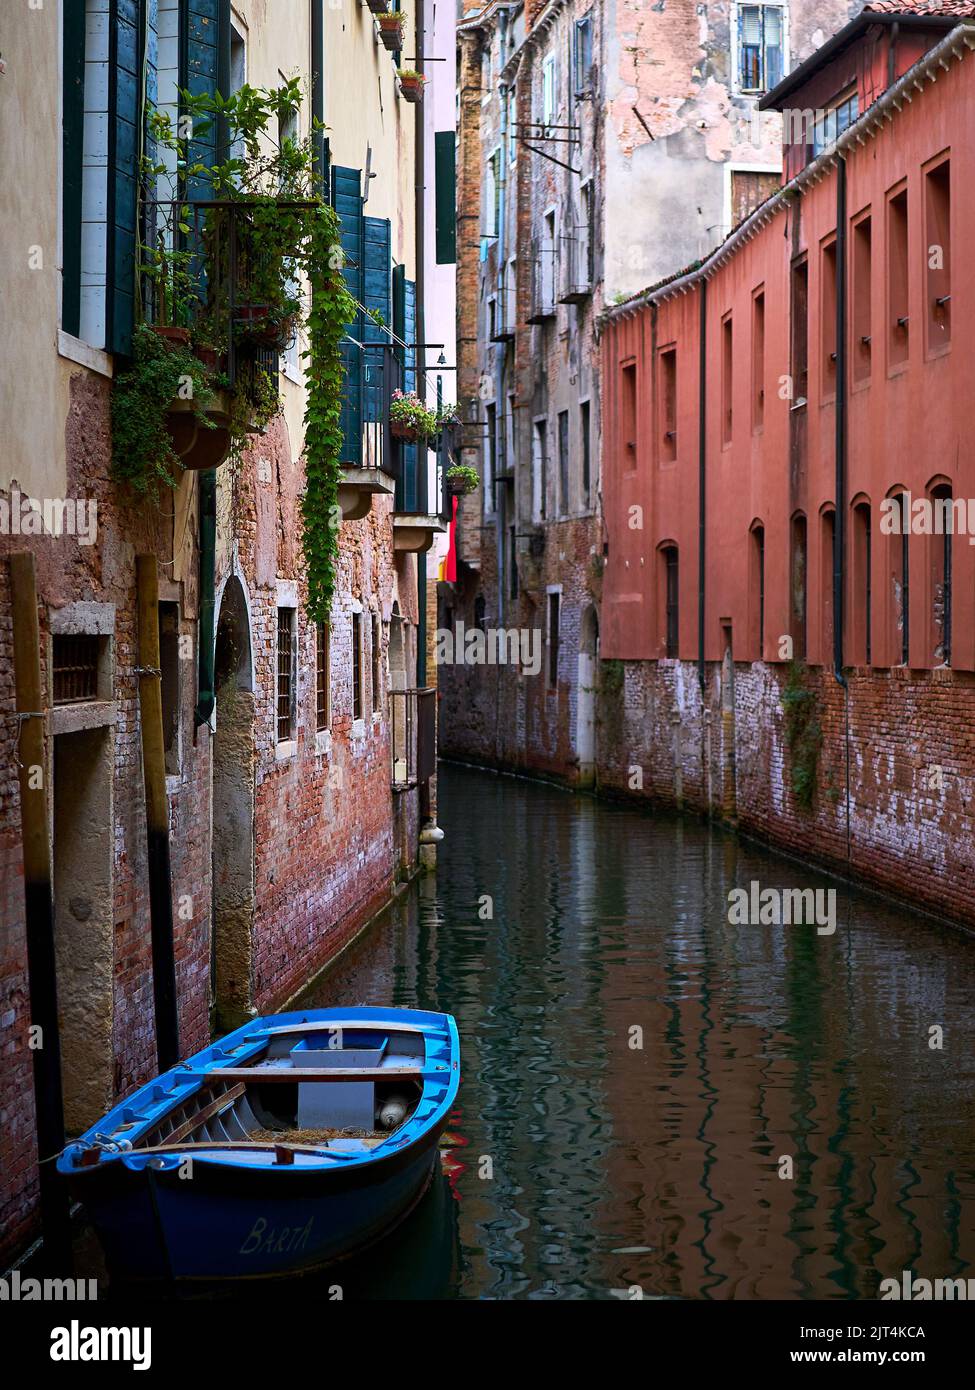 The beautiful town of Venice located in Italy Stock Photo